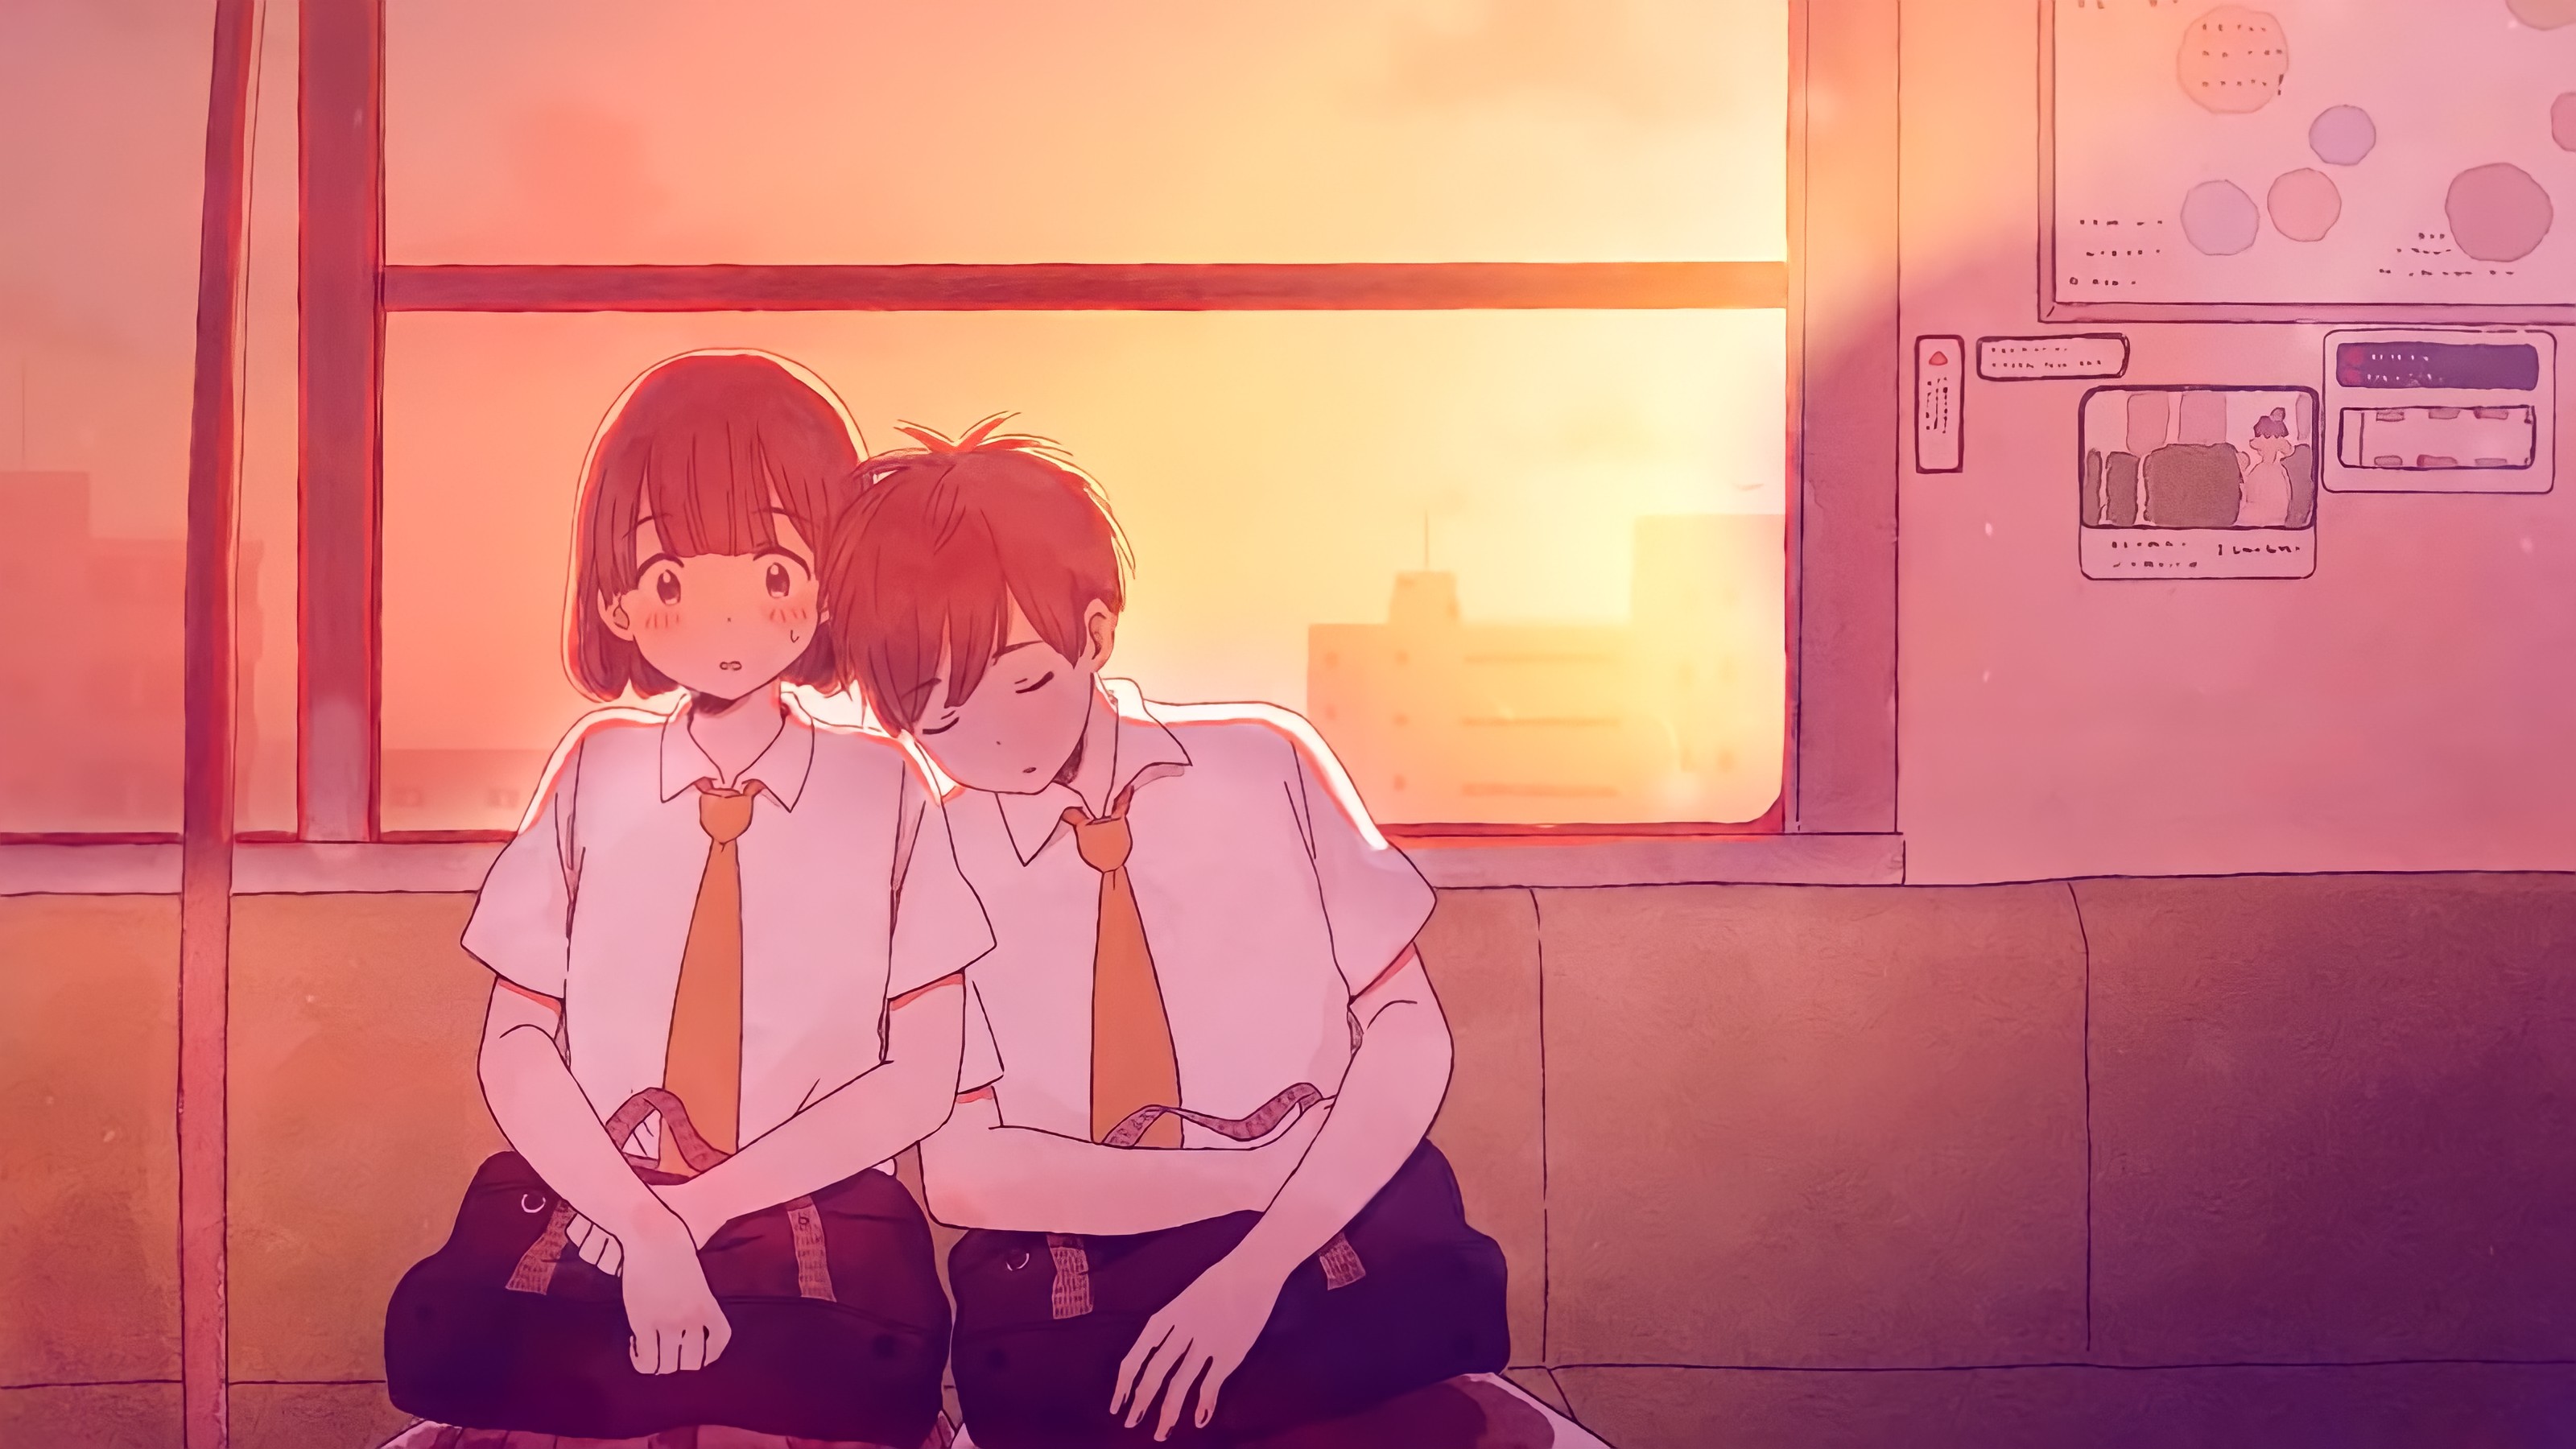 anime girl and boy in love school